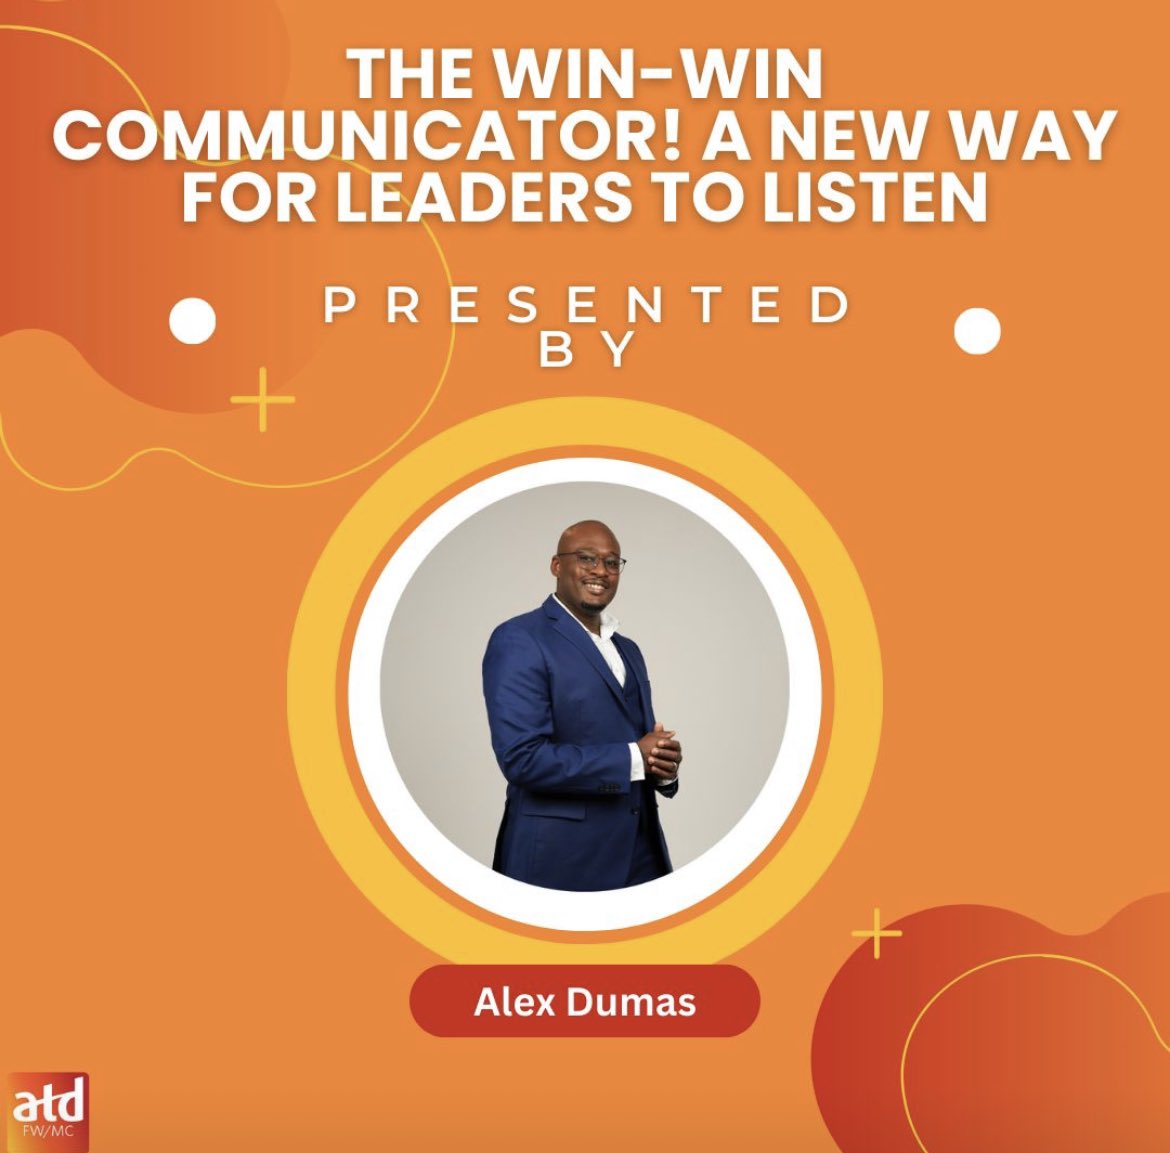 Come learn with #ATDFW at our chapter meeting on May 2nd with Alex Dumas presenting: The Win-Win Communicator! A New Way for Leaders to Listen

Register here: lnkd.in/gSNF722n 

#alwayslearning #learningcommunity #talentdevelopment